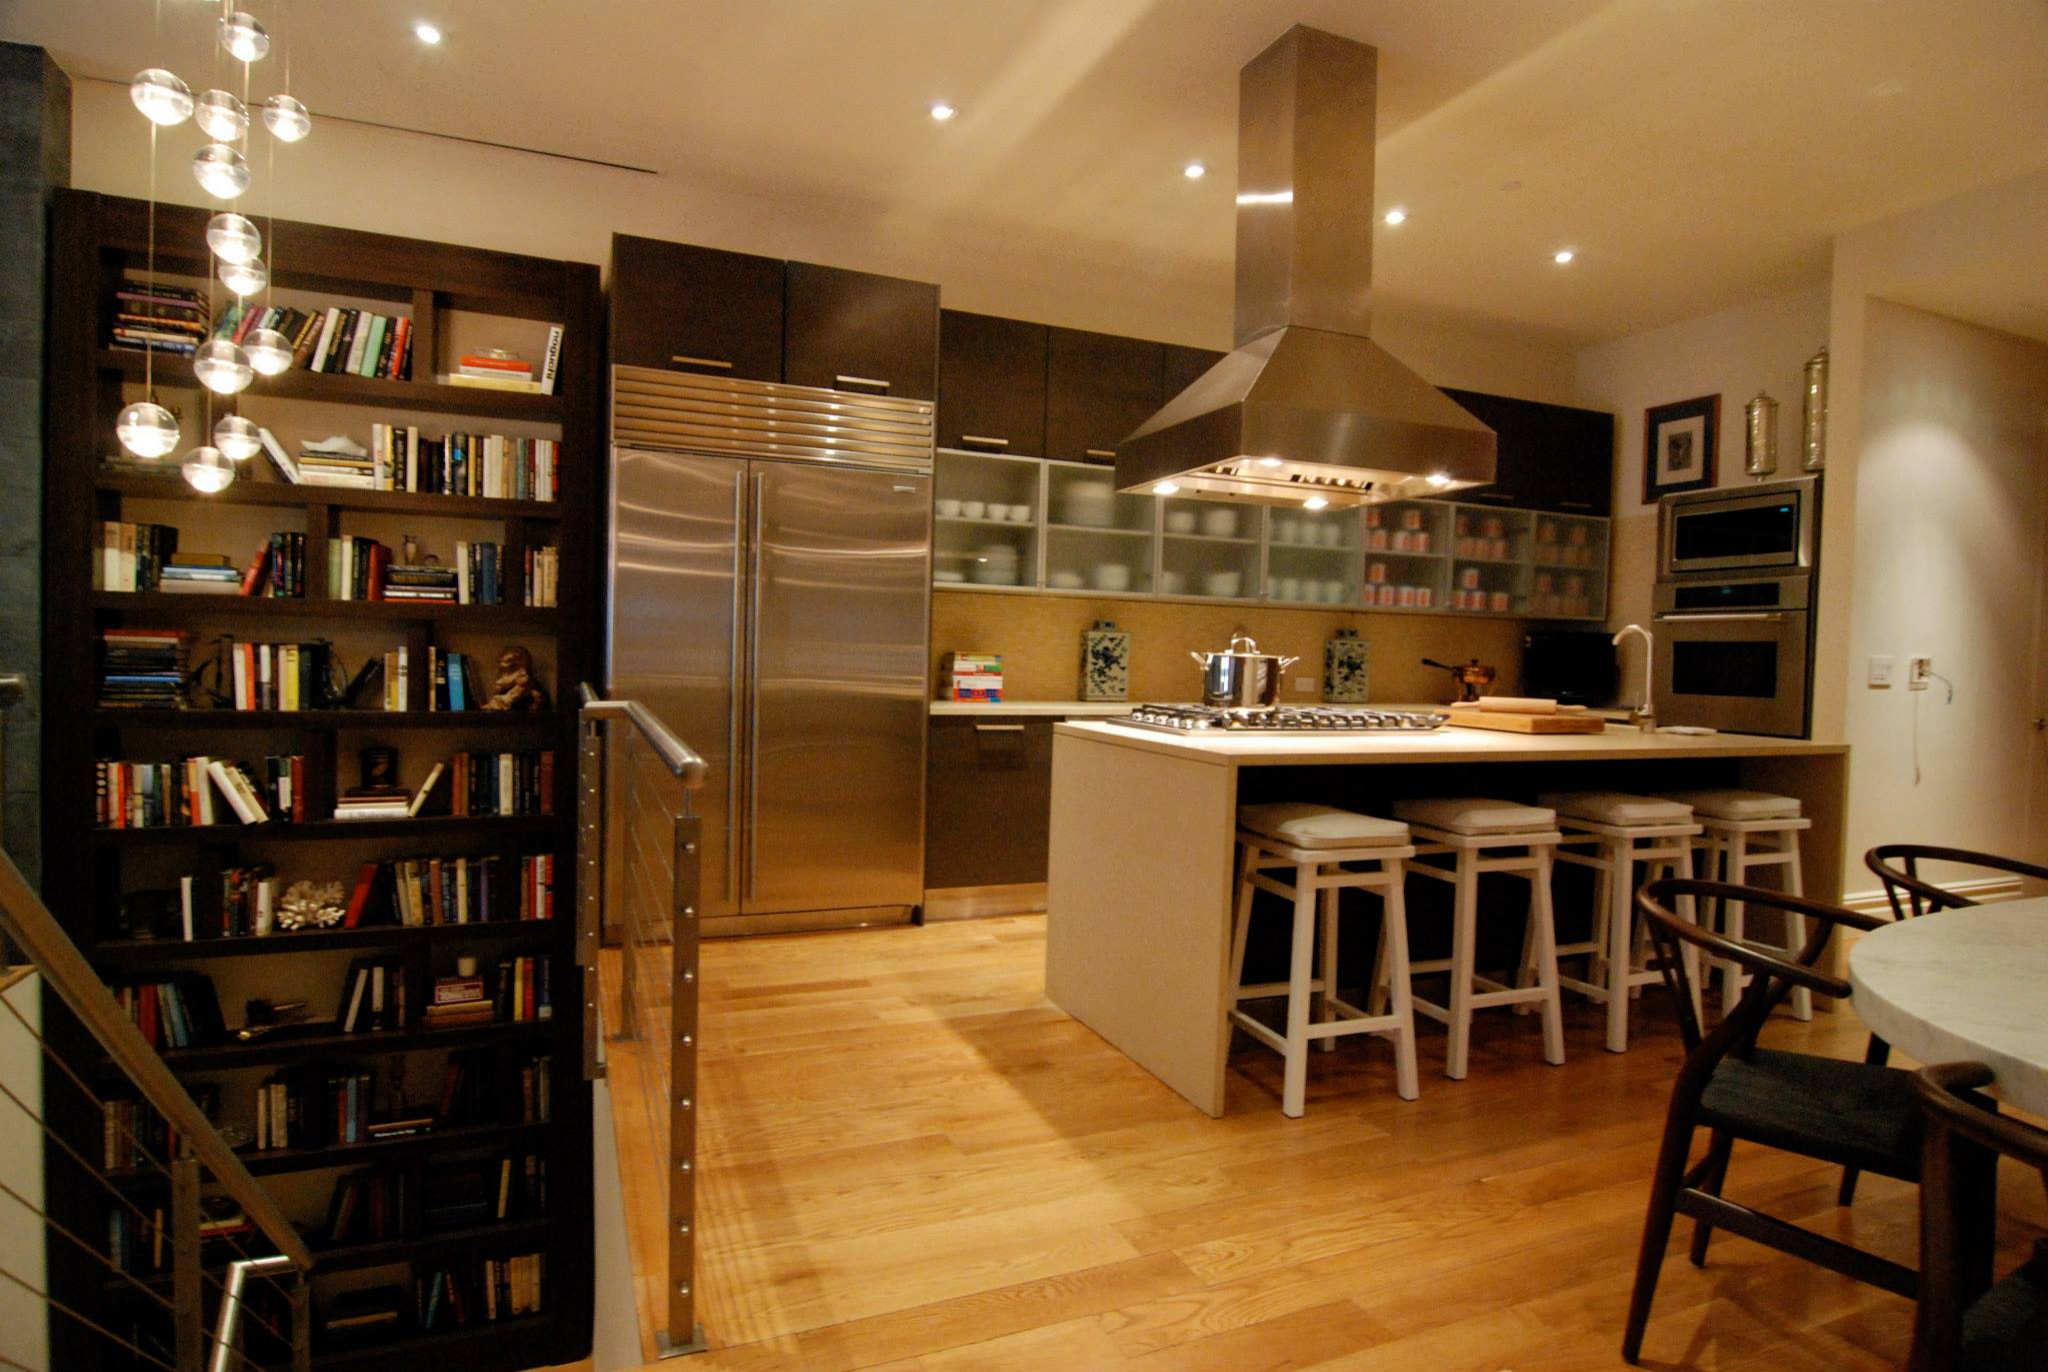 Kitchens , Misc. Projects ....